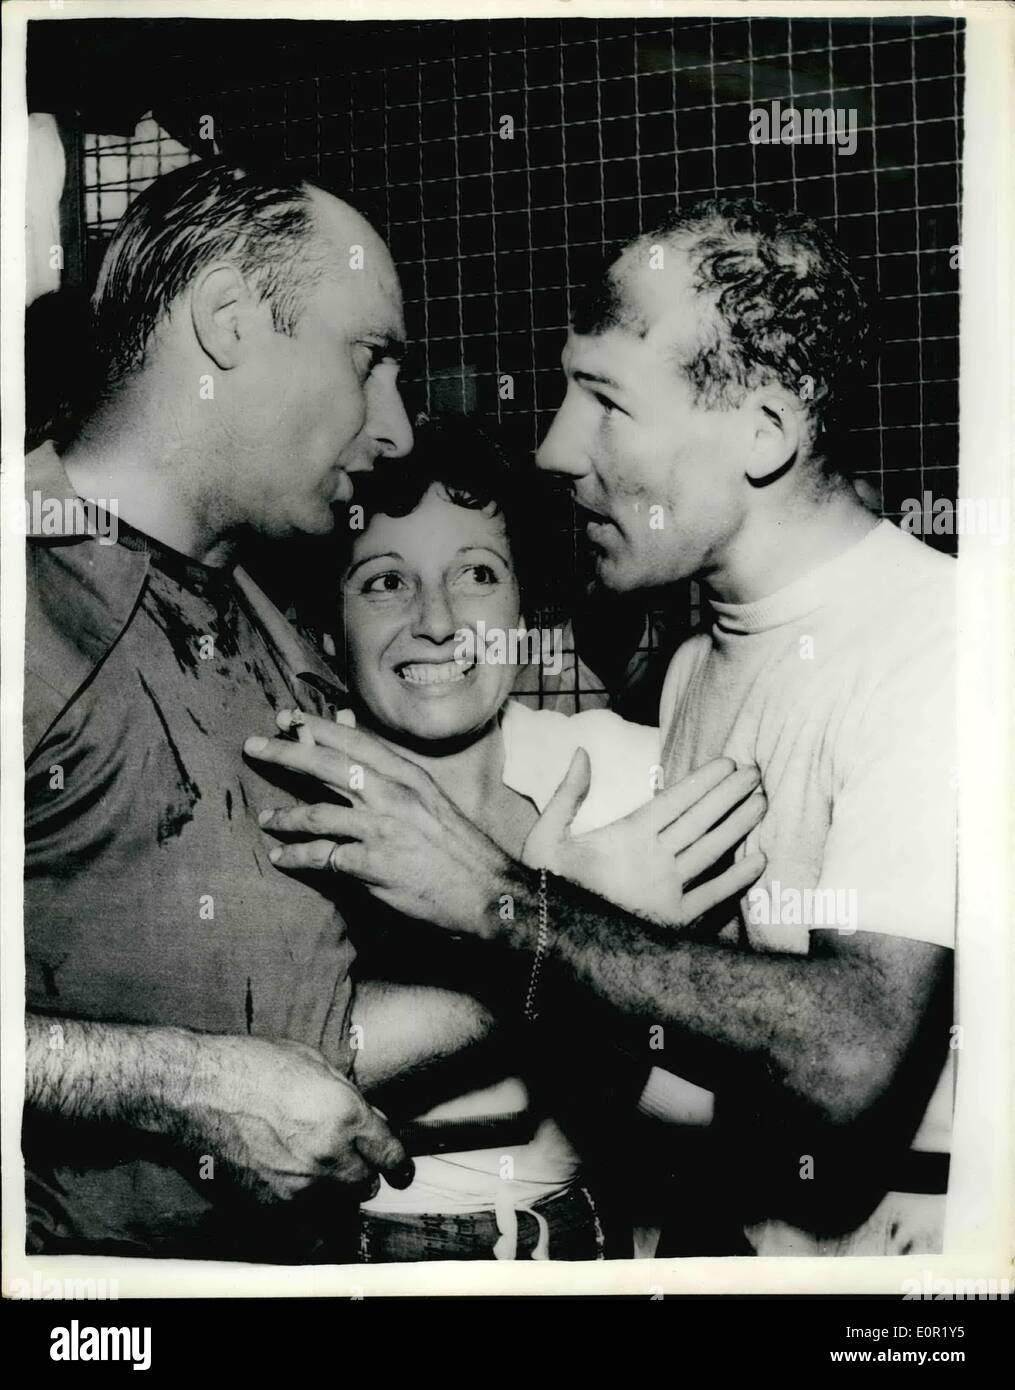 Sep. 09, 1957 - Stirling Moss Wins The Italian Grand Prix: Britain's Stirling Moss won the Italian Grand Prix at Monza on Sunday - in the all British Vanwall with a record average speed of 120.3 m.p.h. World Champion Juan Fangio was beaten into second place. Photo shows Juan Fancio on left congratulates Stirling Moss on his great victory at Monza. Stock Photo